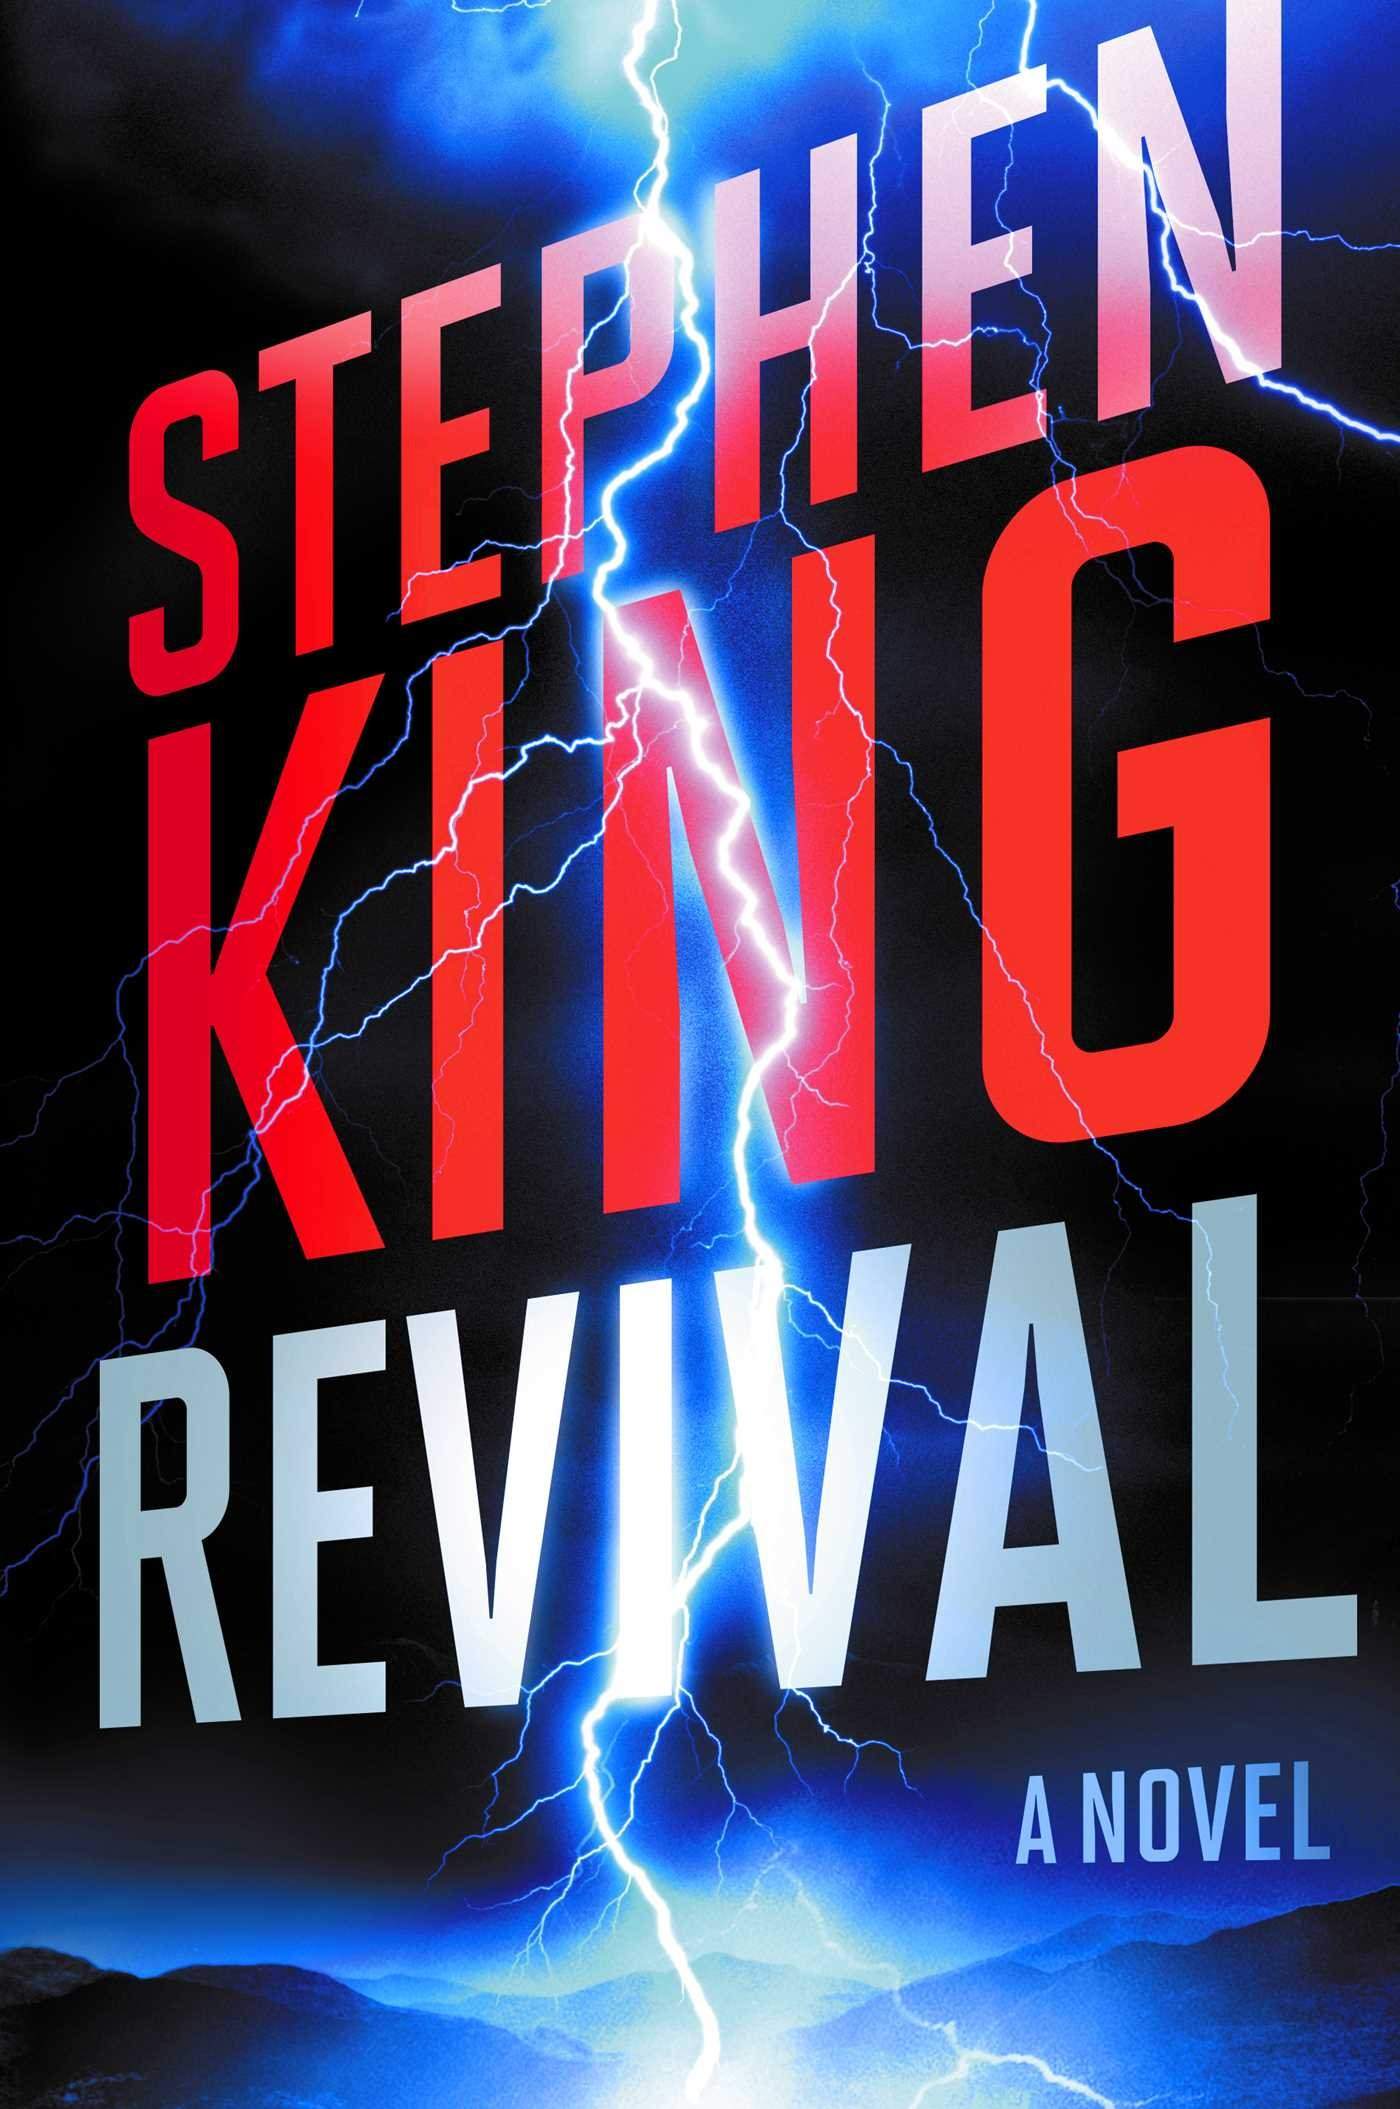 elevation stephen king book review